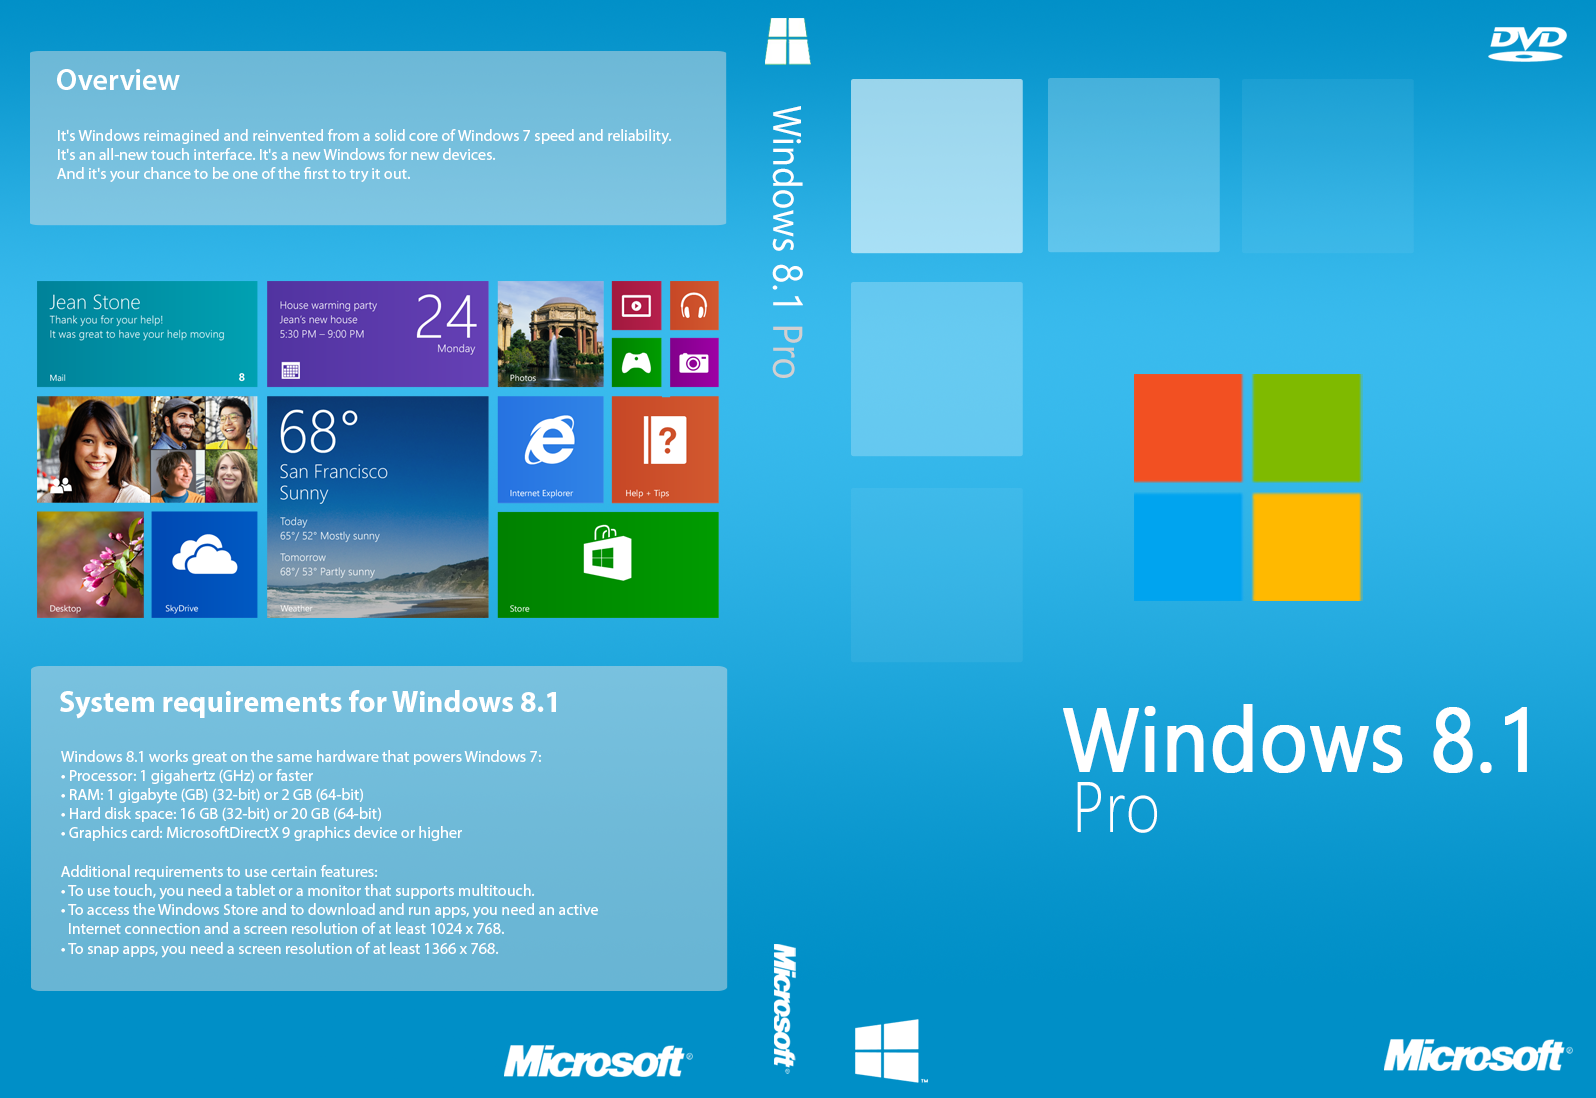 which version of windows 8 do i need for mac